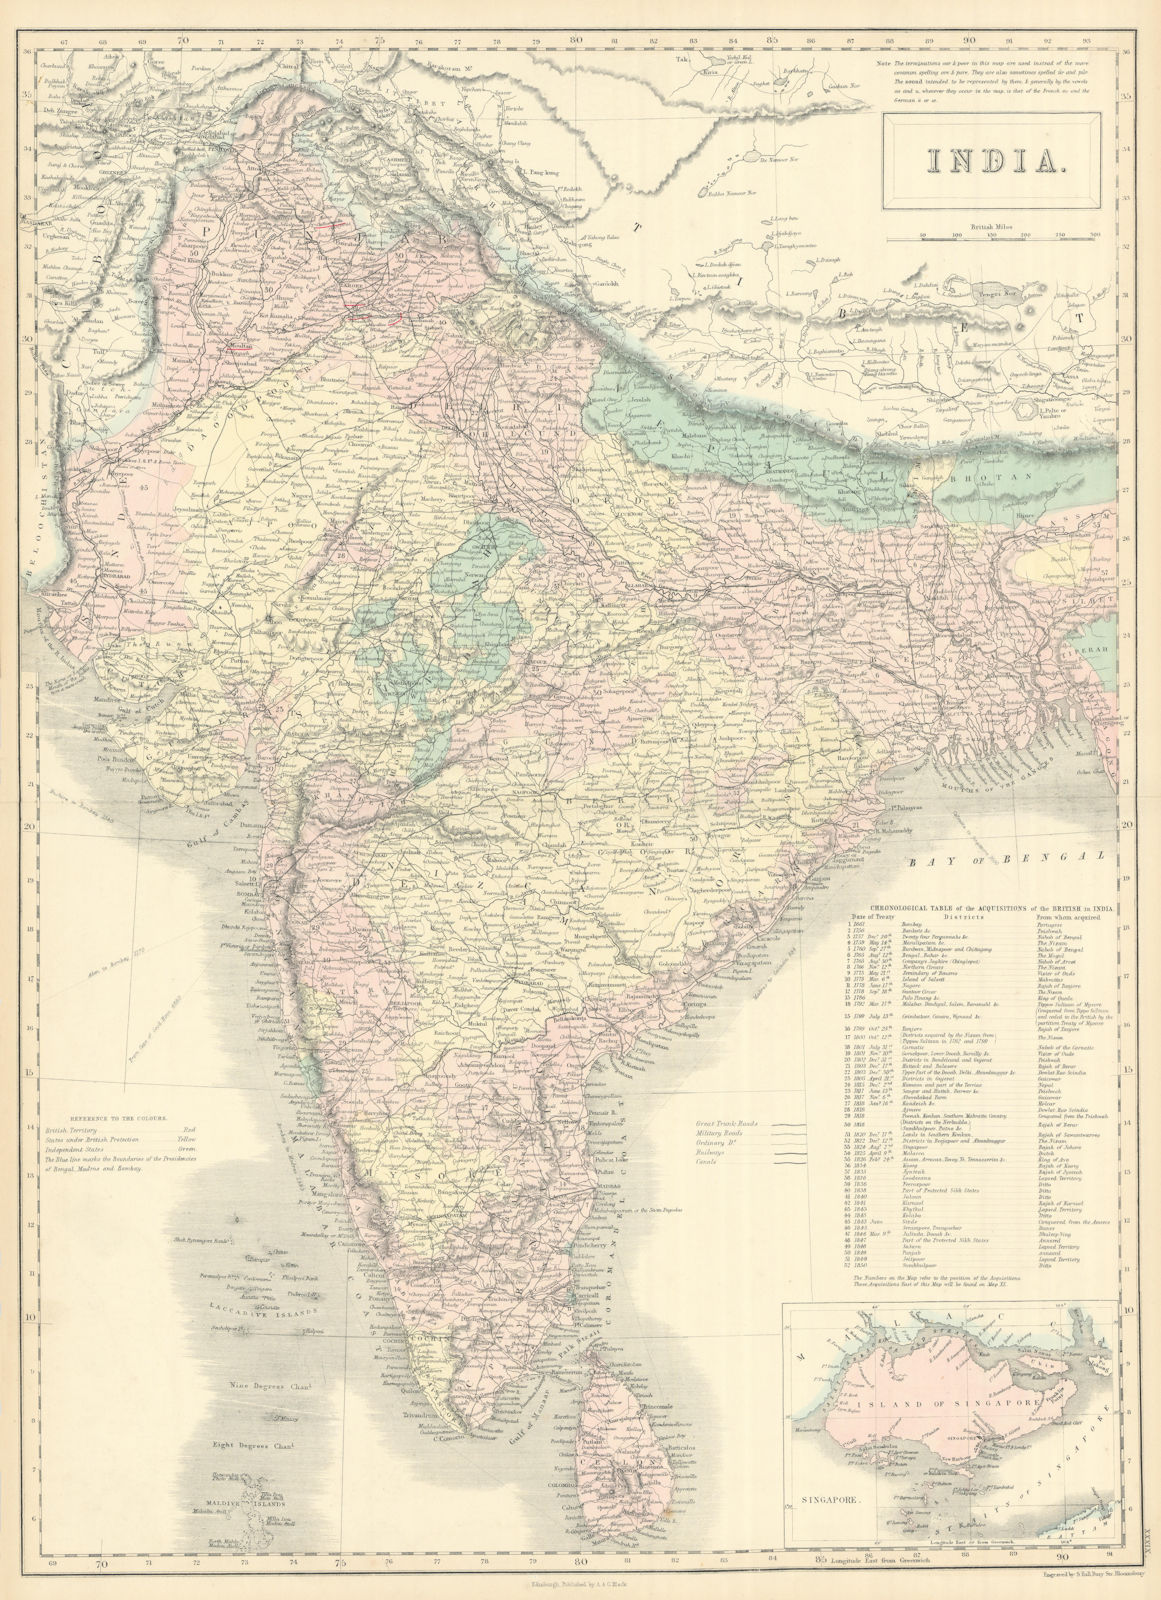 Associate Product British India. Inset Singapore plan. SIDNEY HALL 1854 old antique map chart